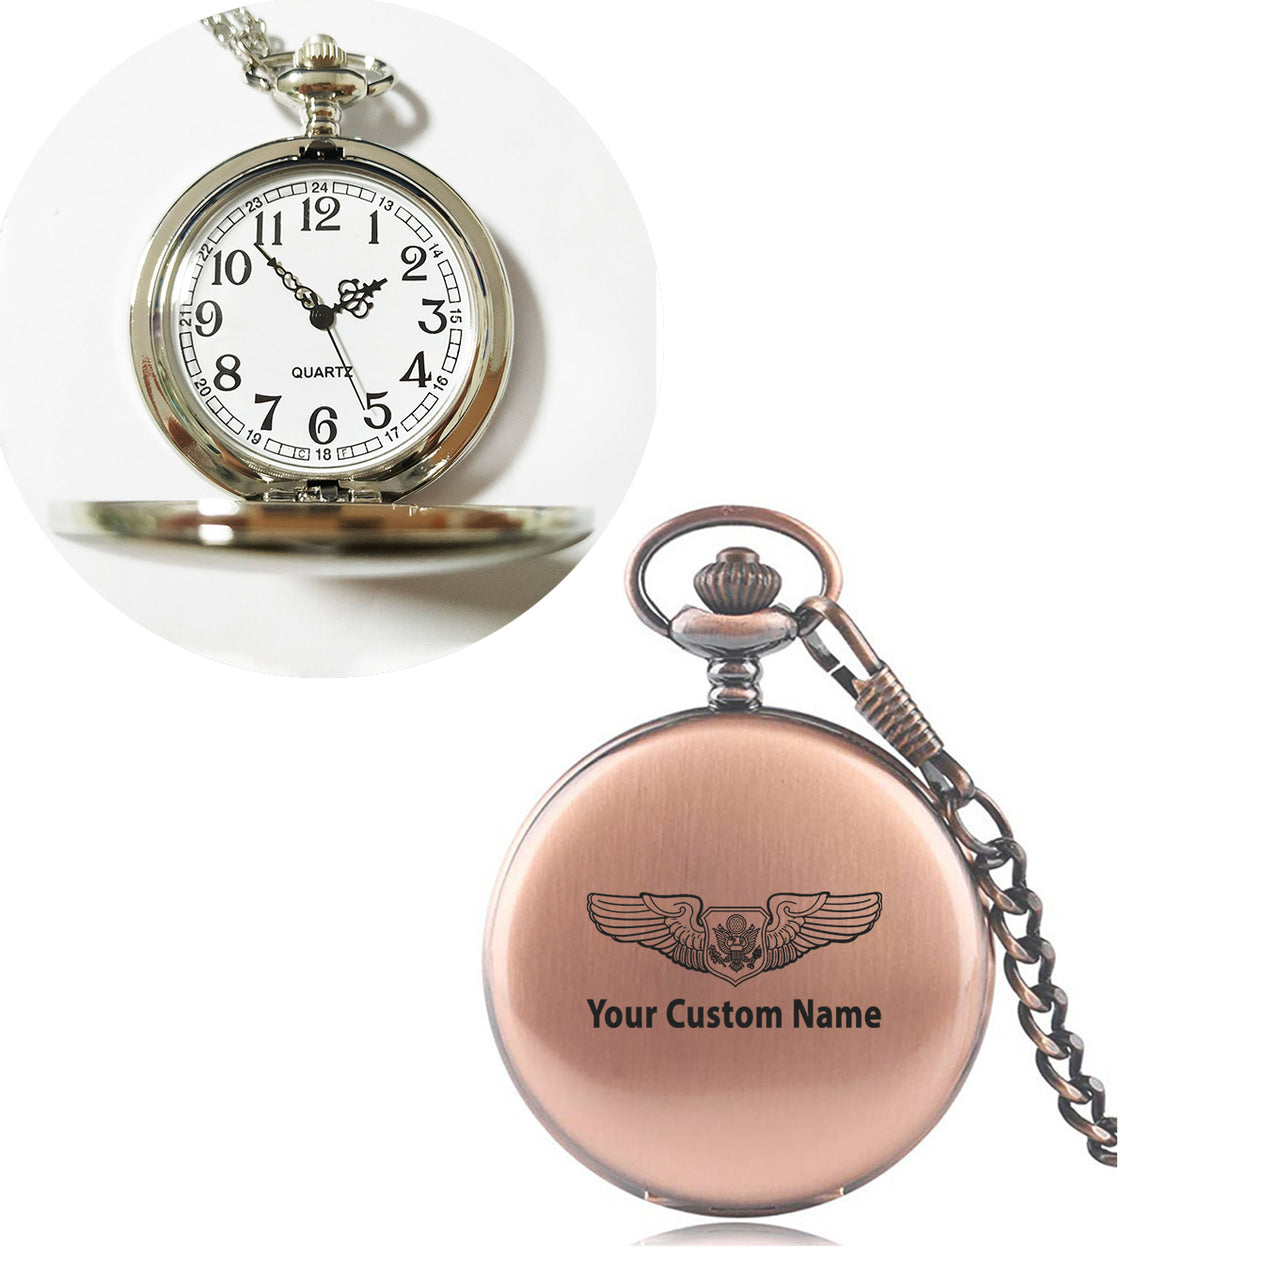 Custom Name (Special US Air Force) Designed Pocket Watches